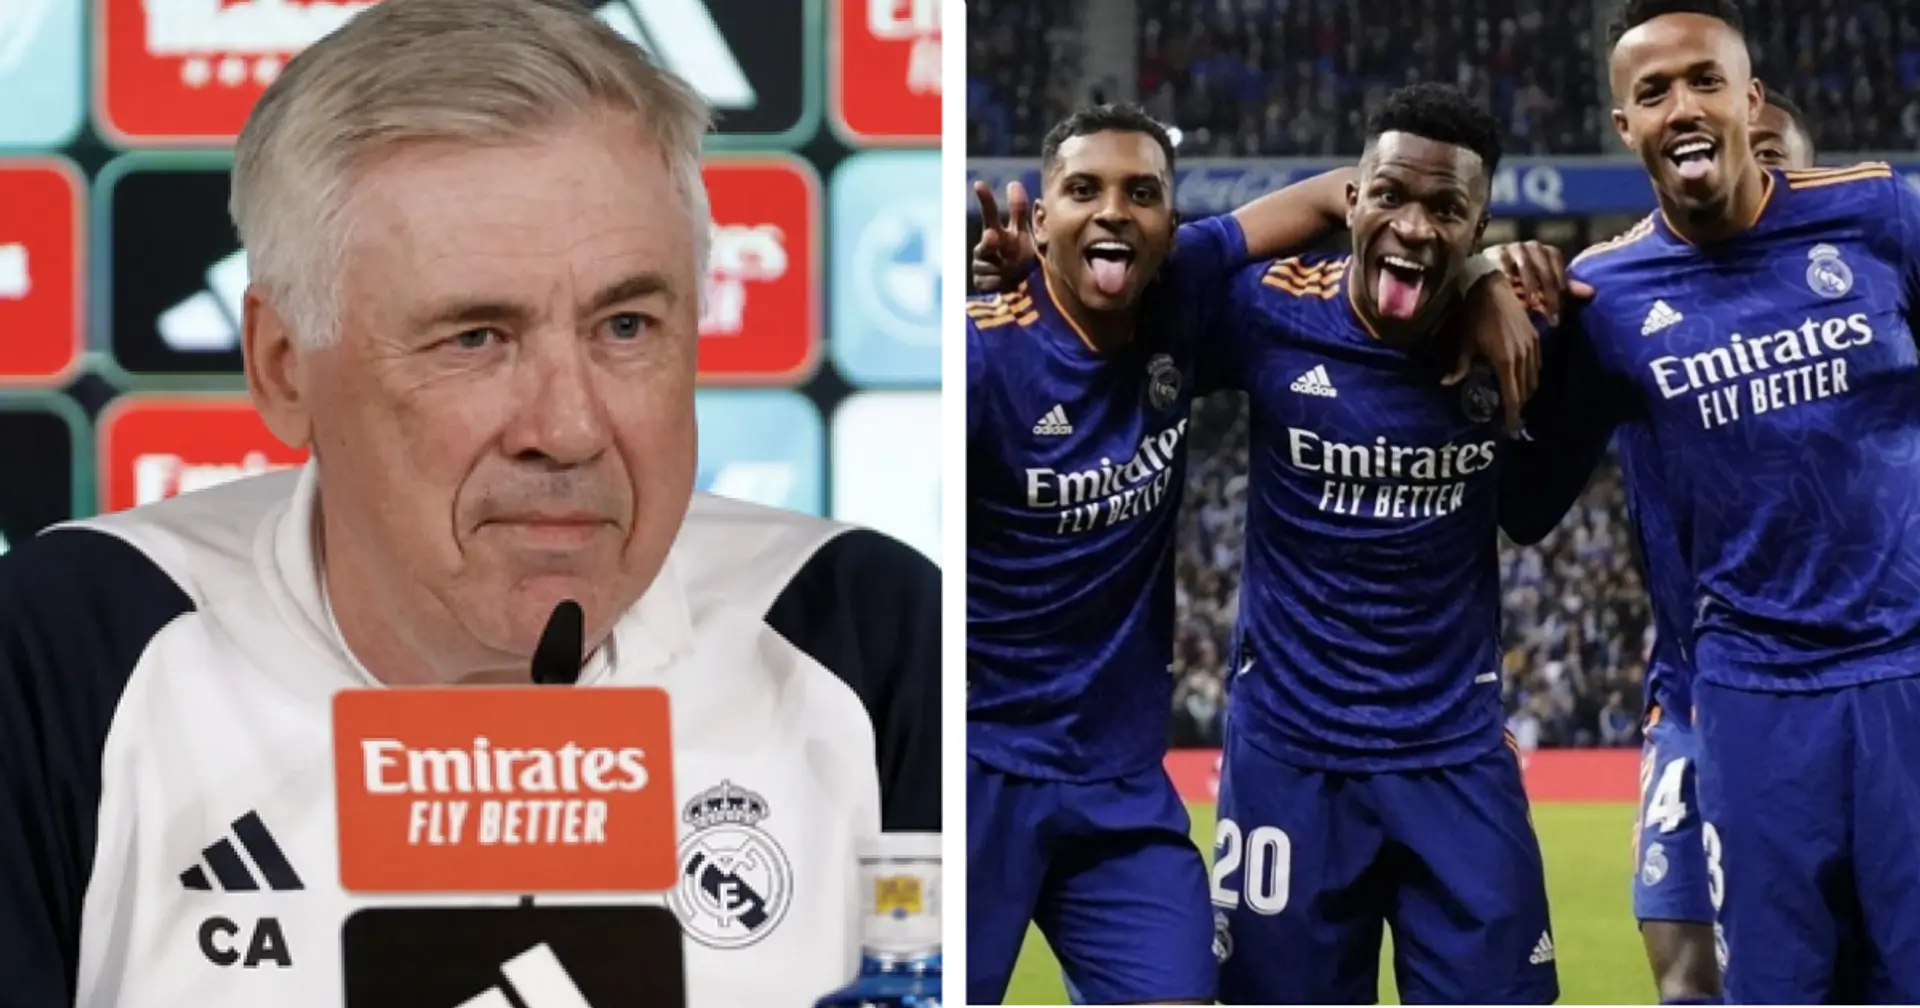 Ancelotti reveals one surprise player could start in Clasico, jokes about Rodrygo rest